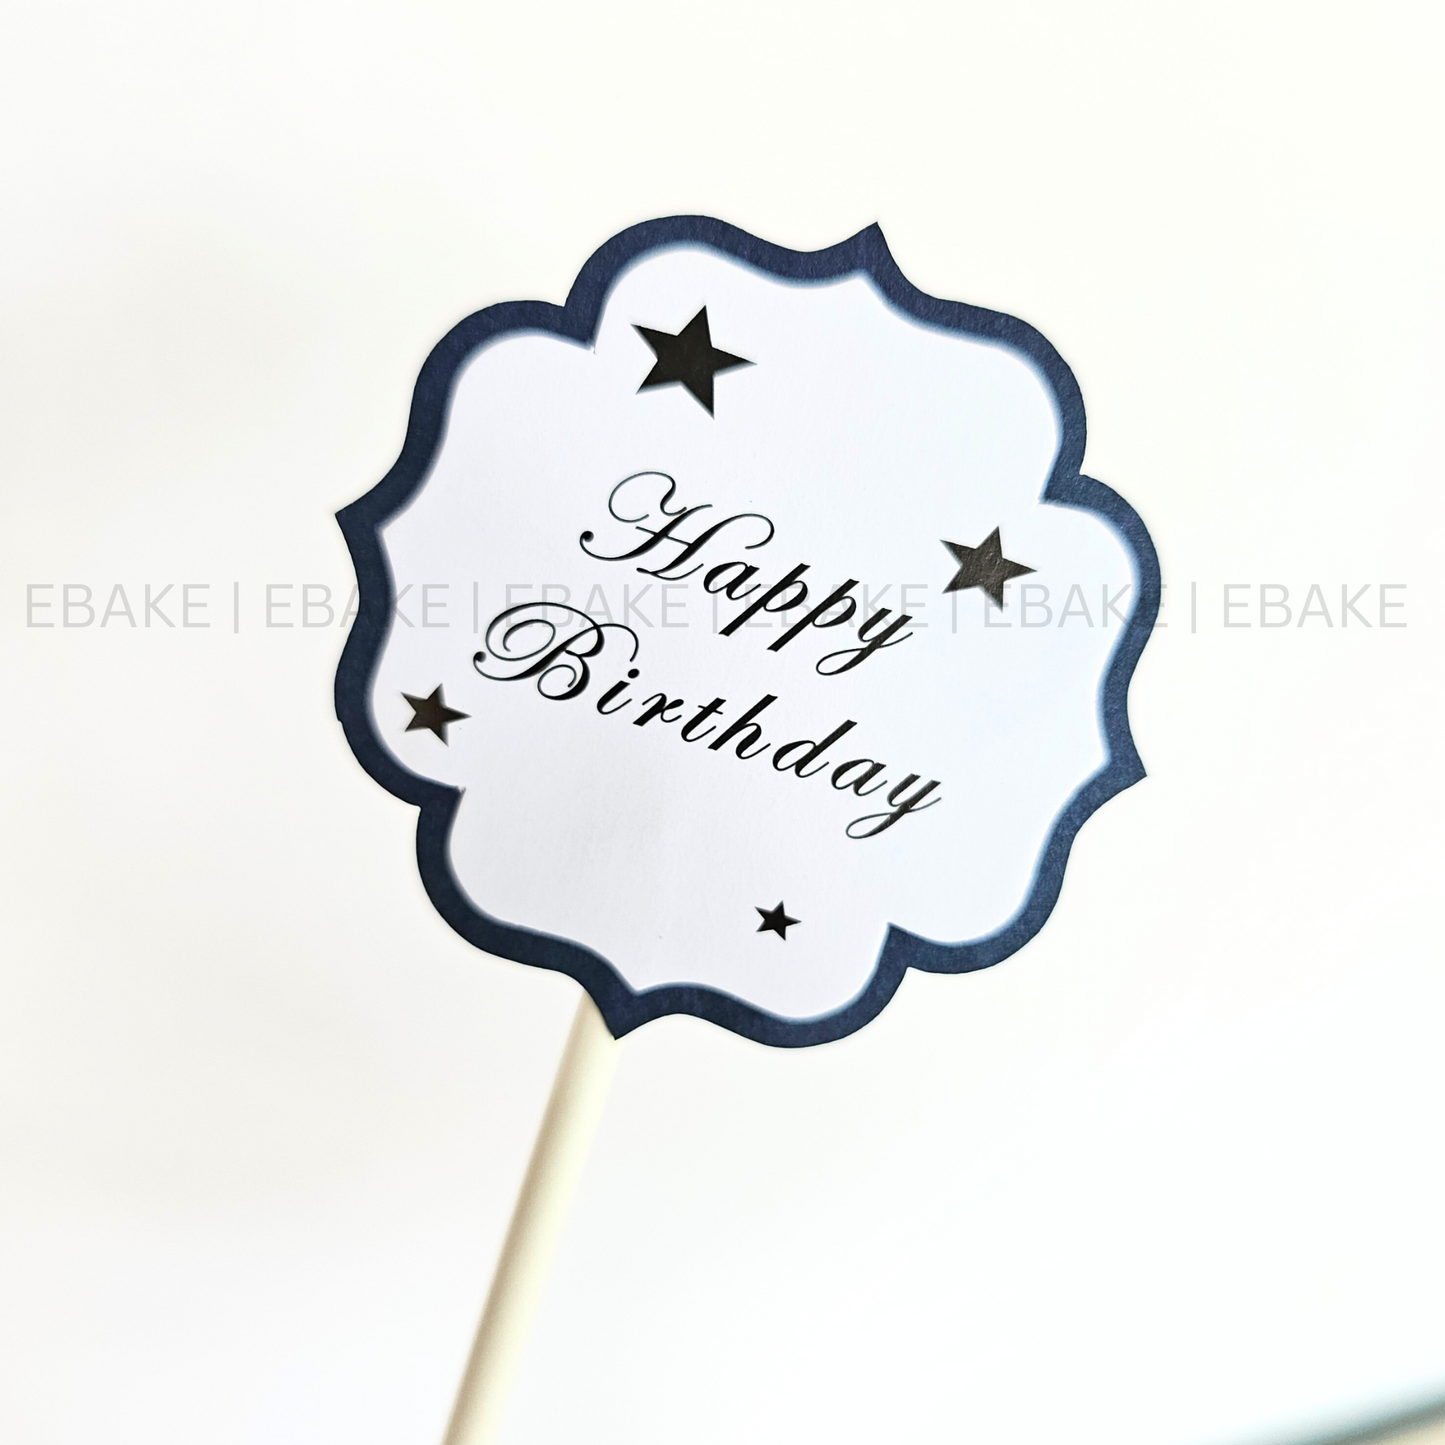 Birthday Paper Topper Black (Set of 3 pieces)